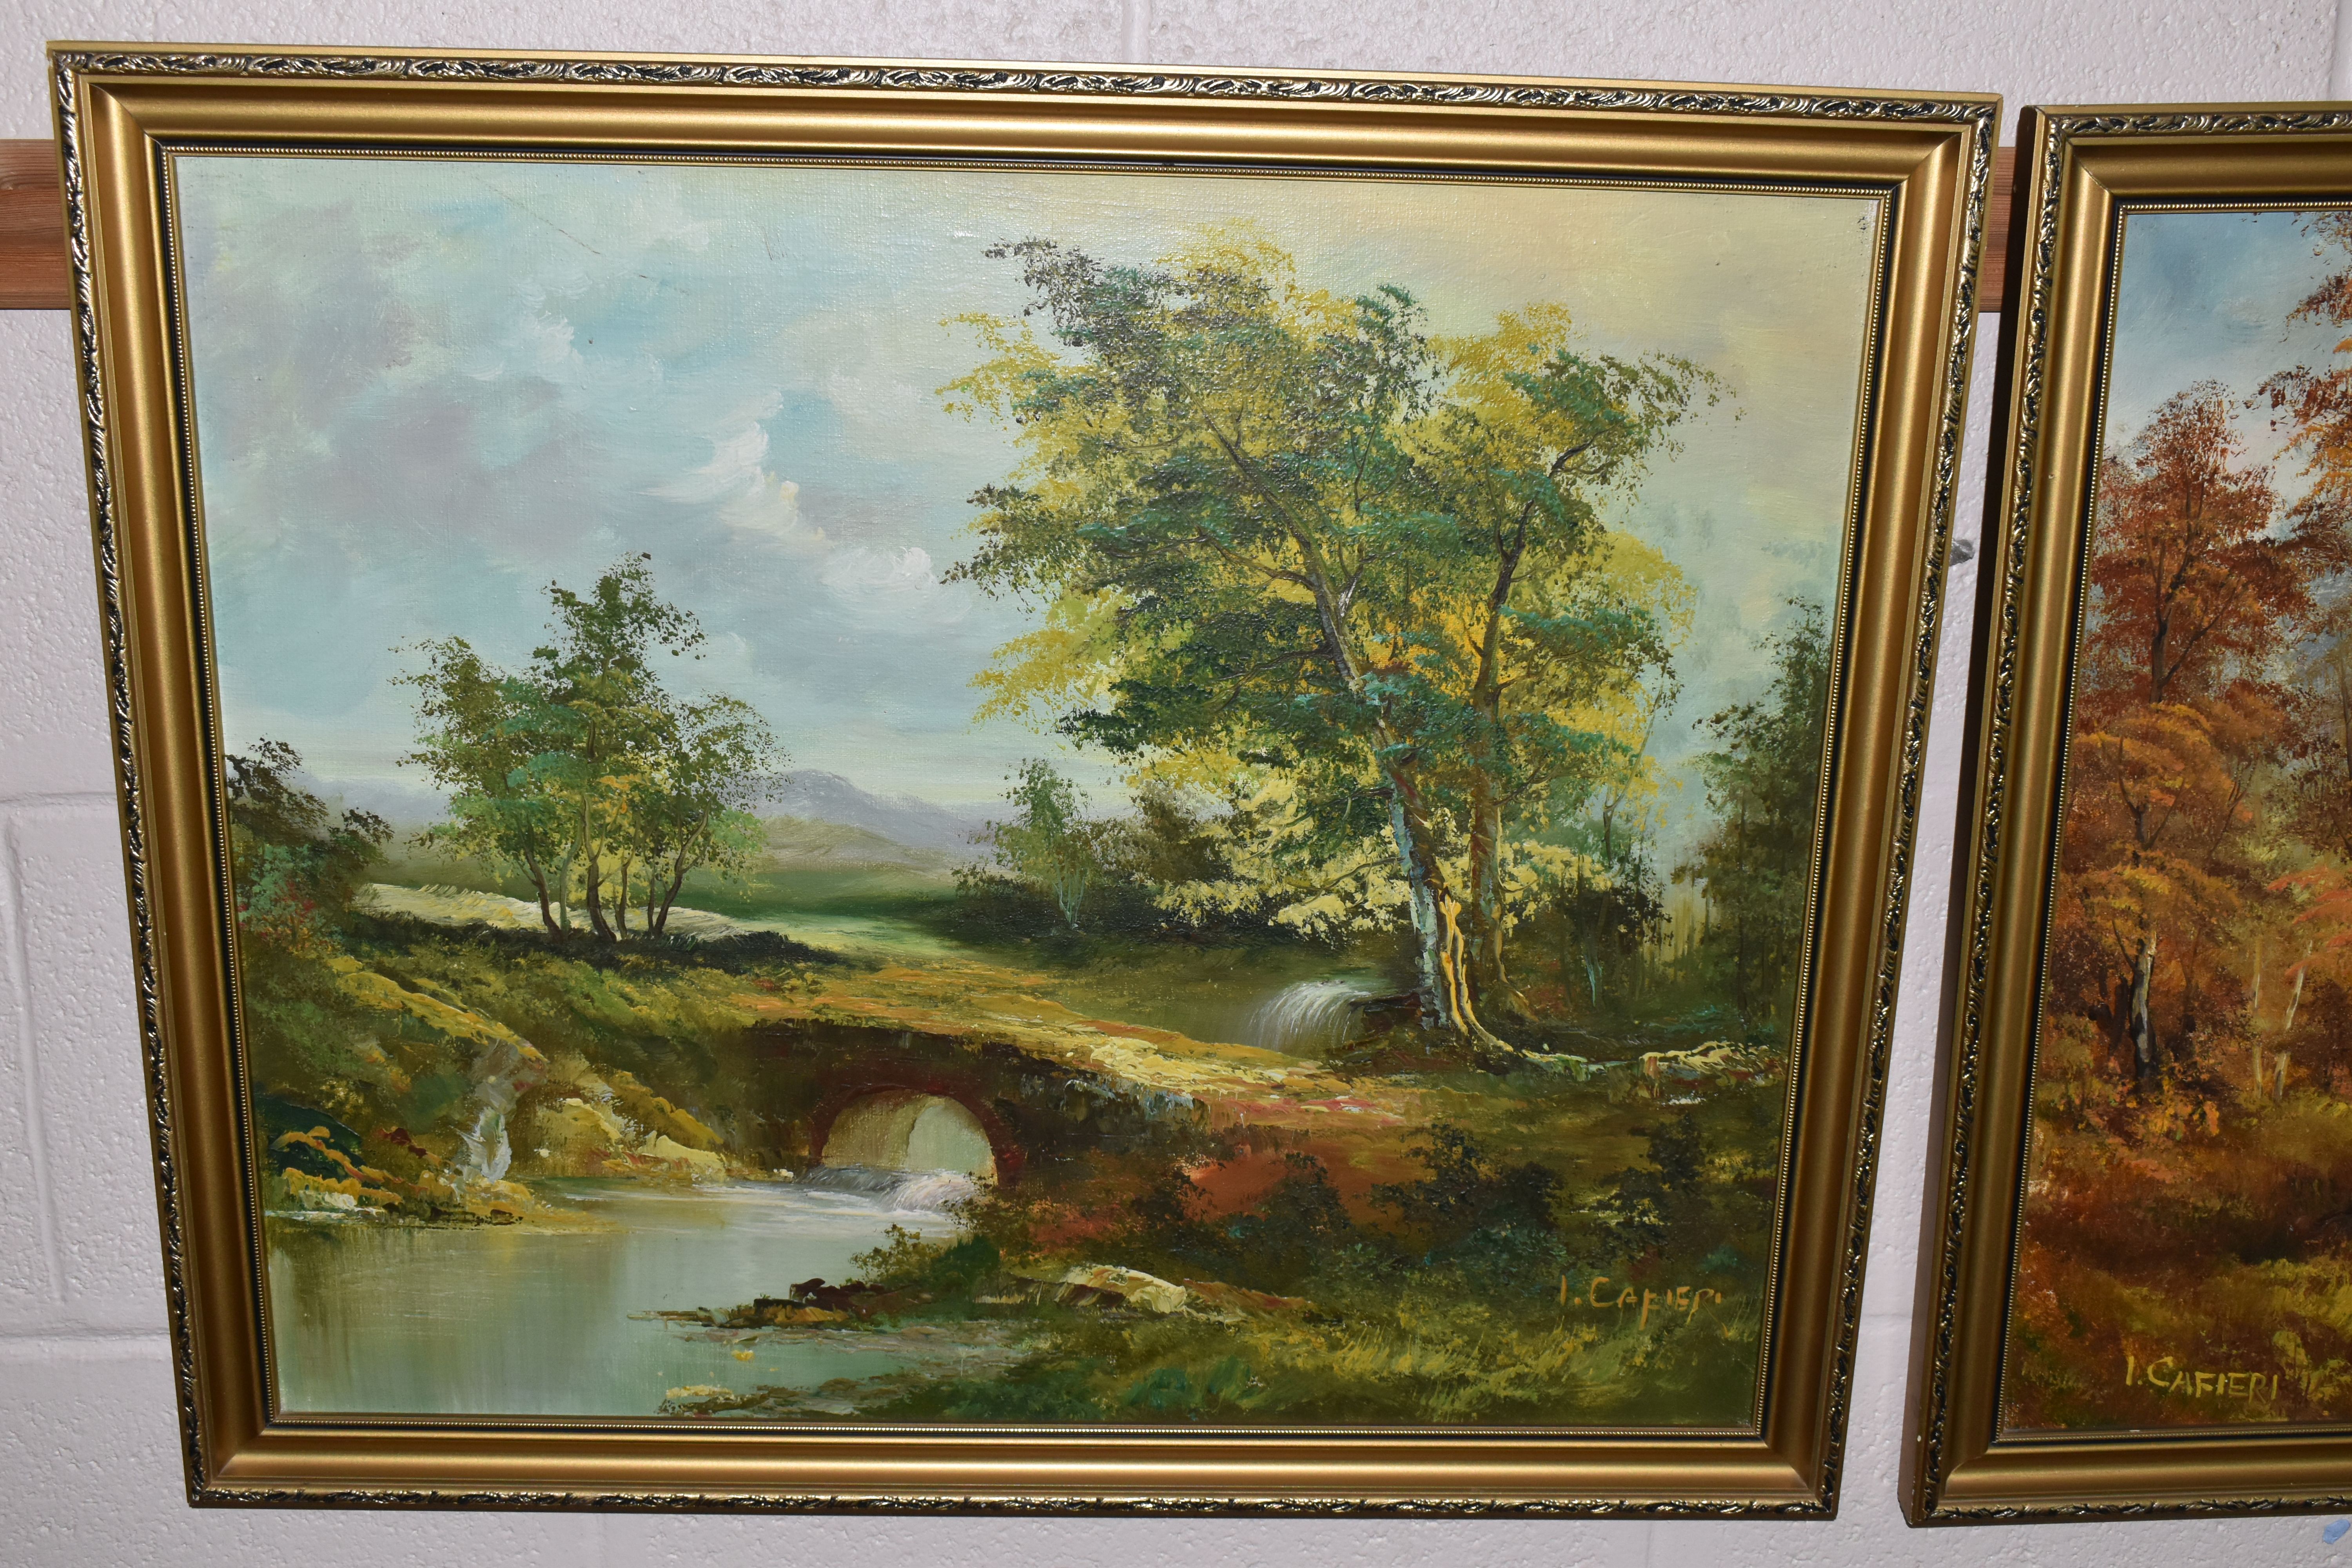 I. CAFIERI (MODERN) Two landscape scenes, oils on canvas, signed lower left and right, 49cm x - Image 4 of 4